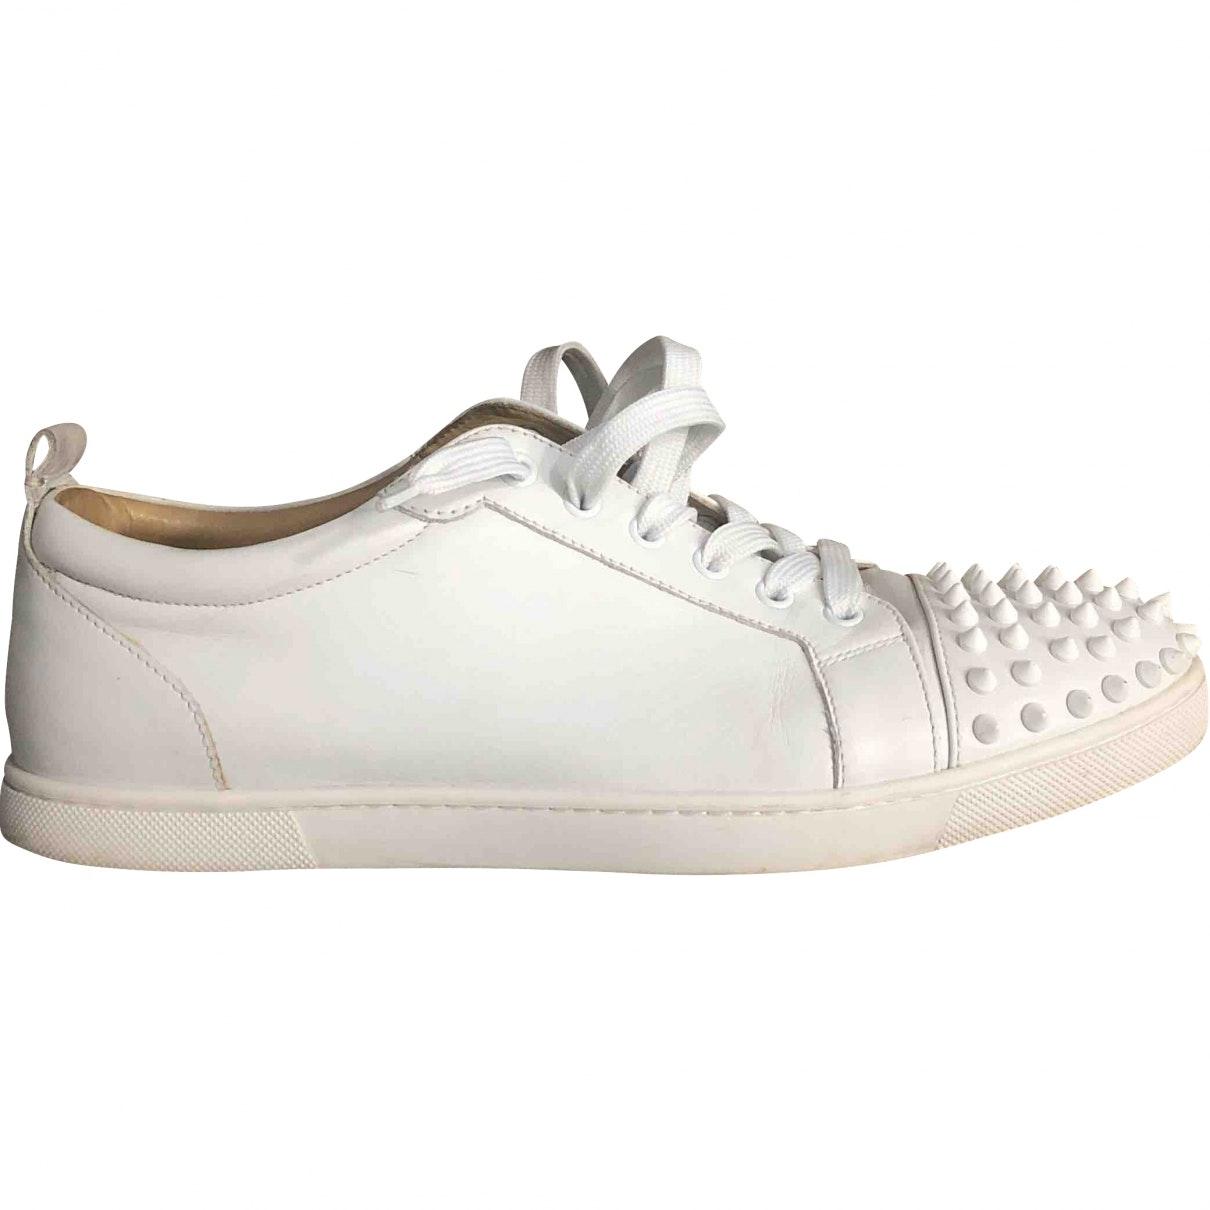 Christian Louboutin Louis Leather Low Trainers in White for Men - Lyst